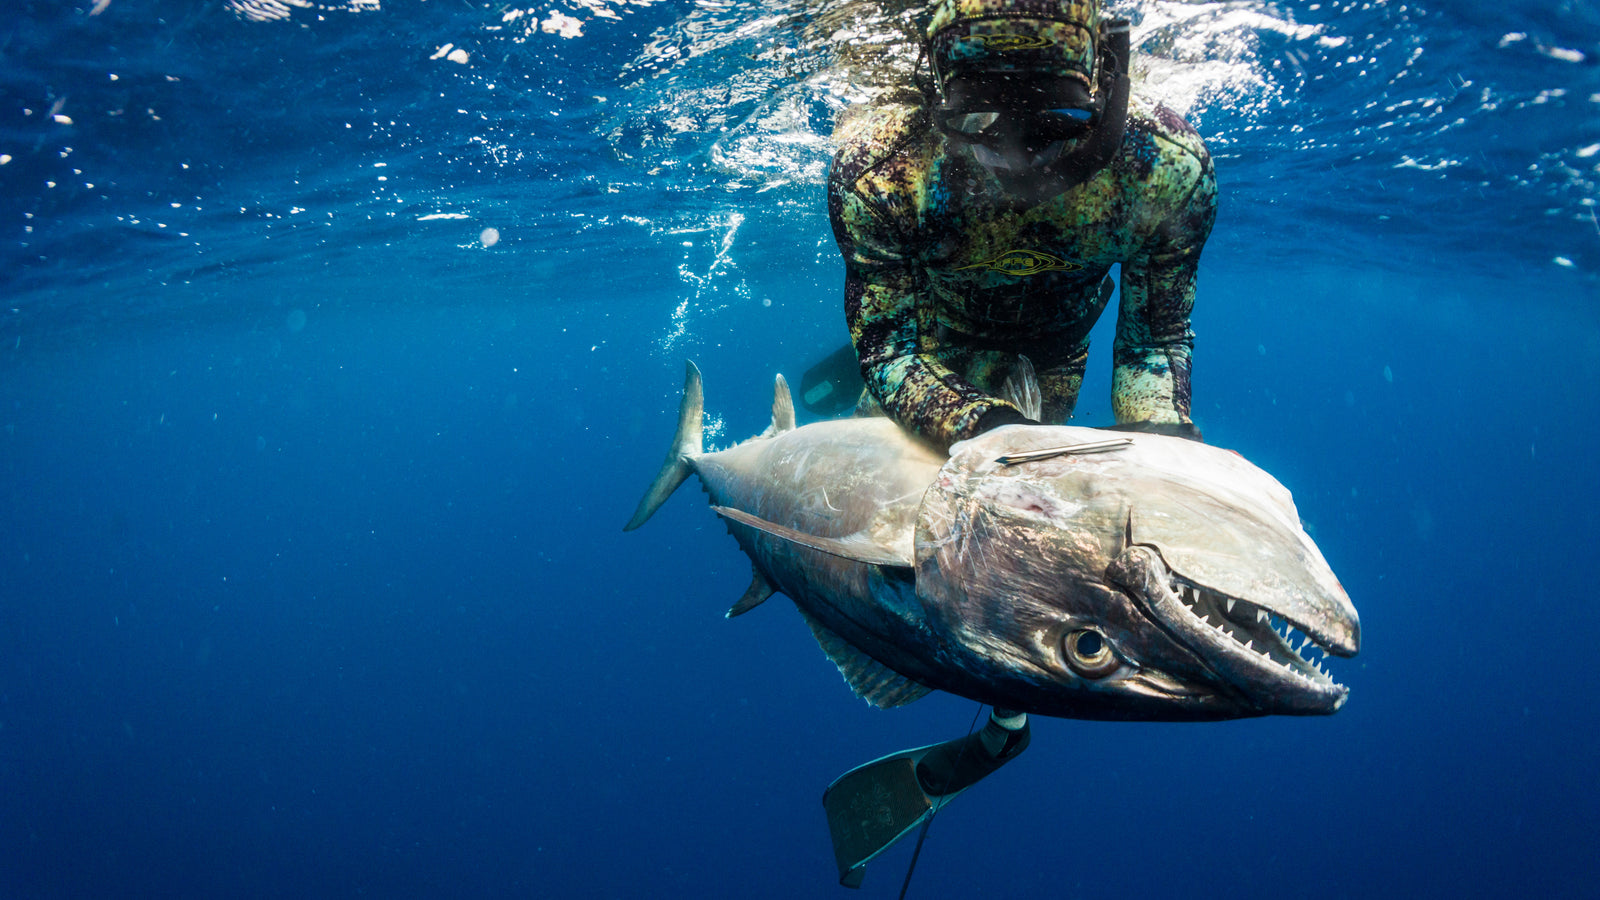 Spearfishing and Freediving Gear  Freedive Outfitters - Spear America